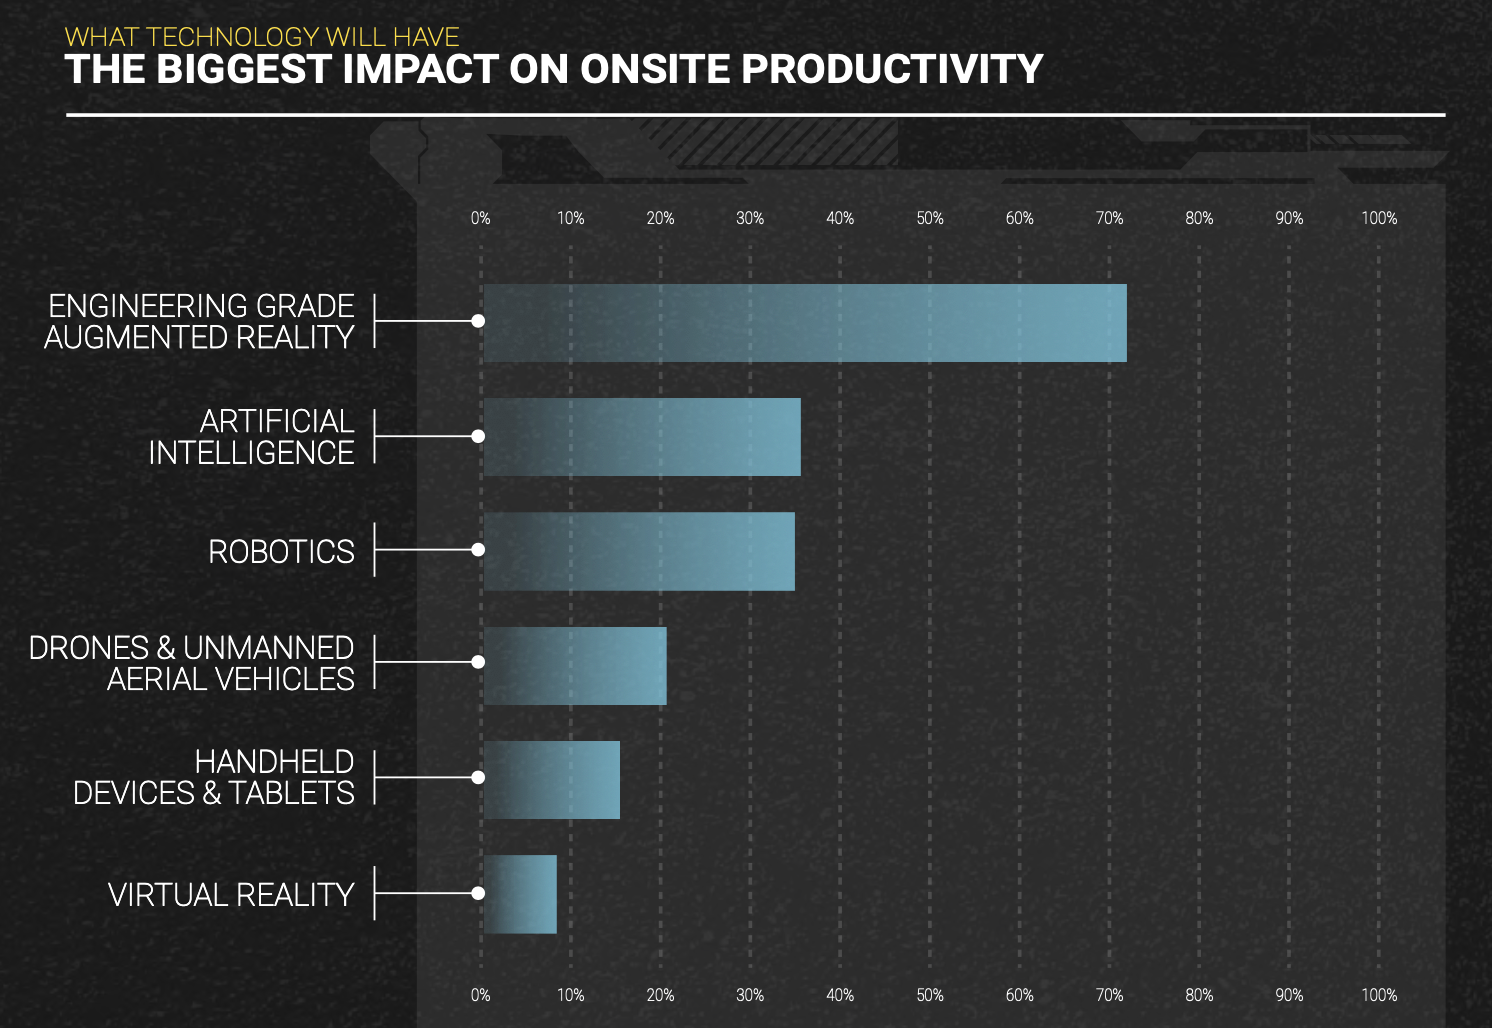 Jobsite managers see tech having more impact on productvity